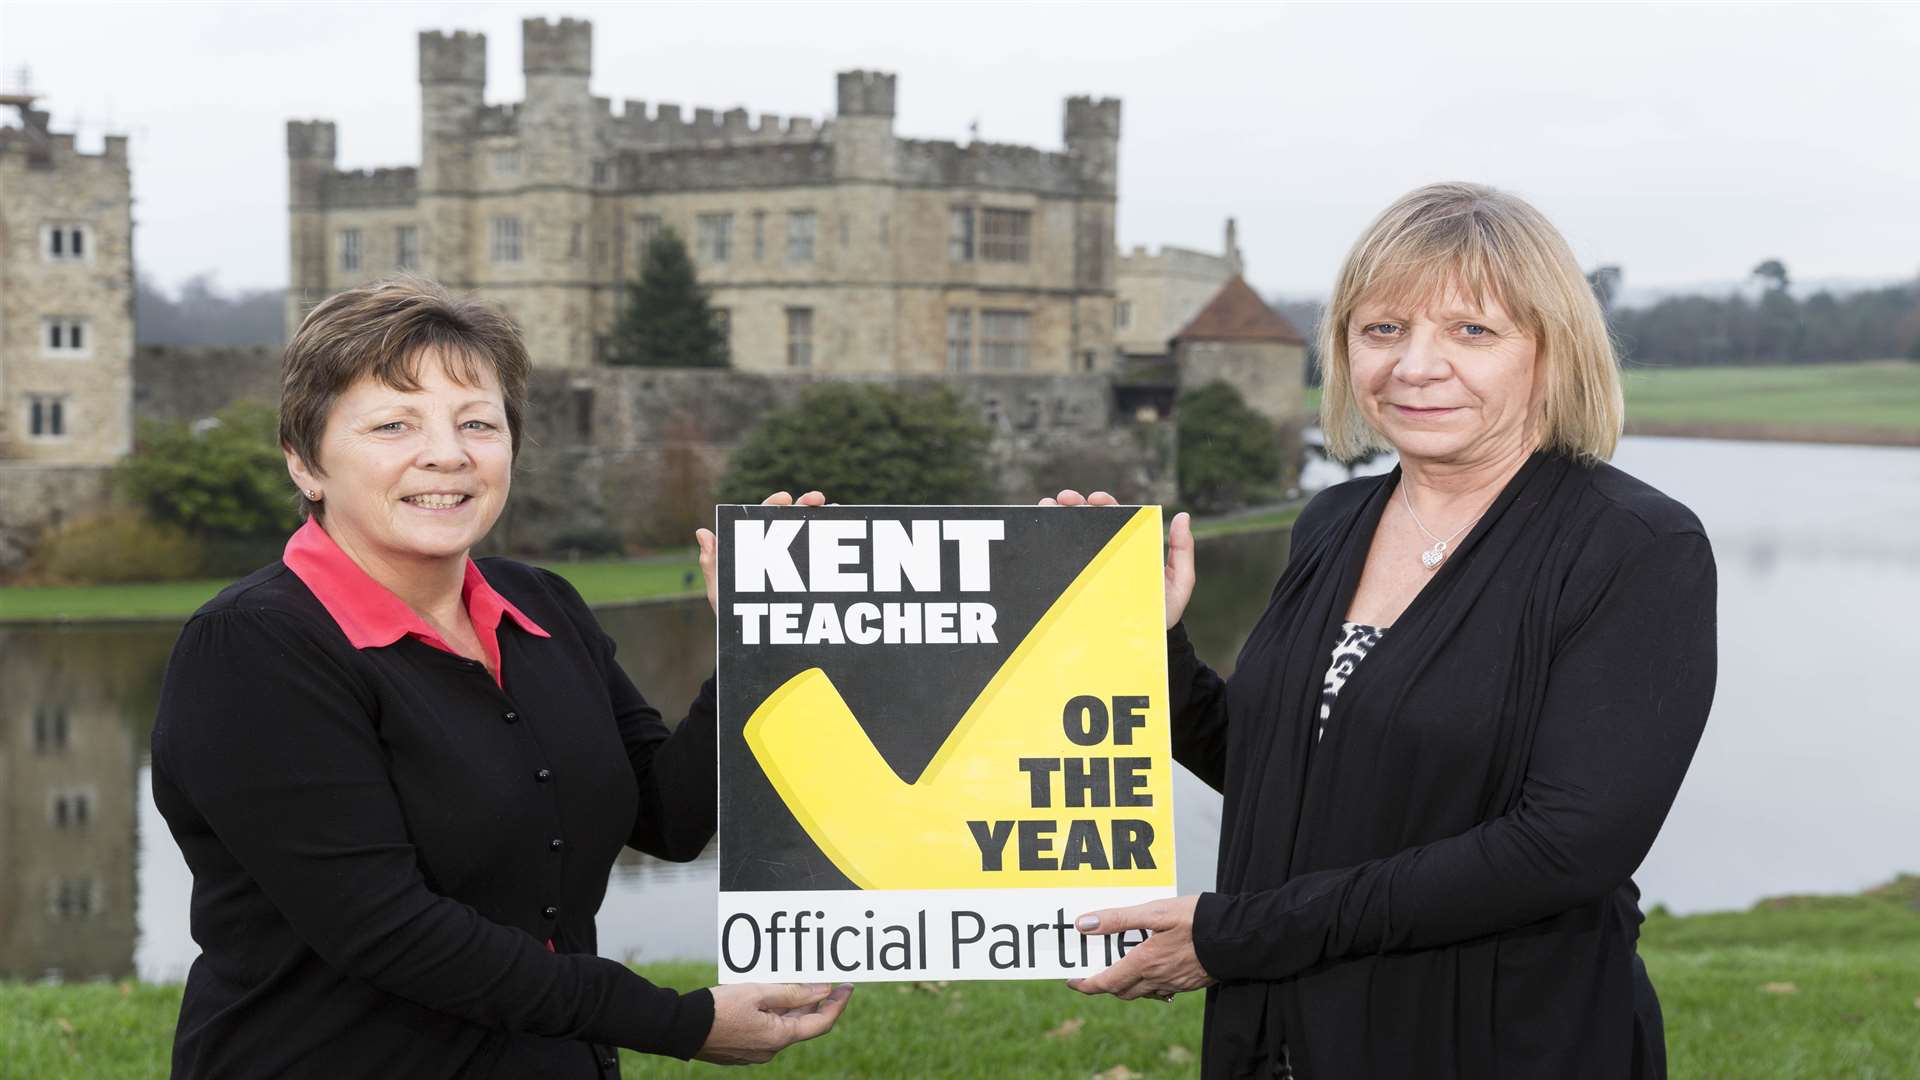 From left, Sheila Graham and Janice Shannon of SELT, key partners of the Kent Teacher of the Year Awards 2016.